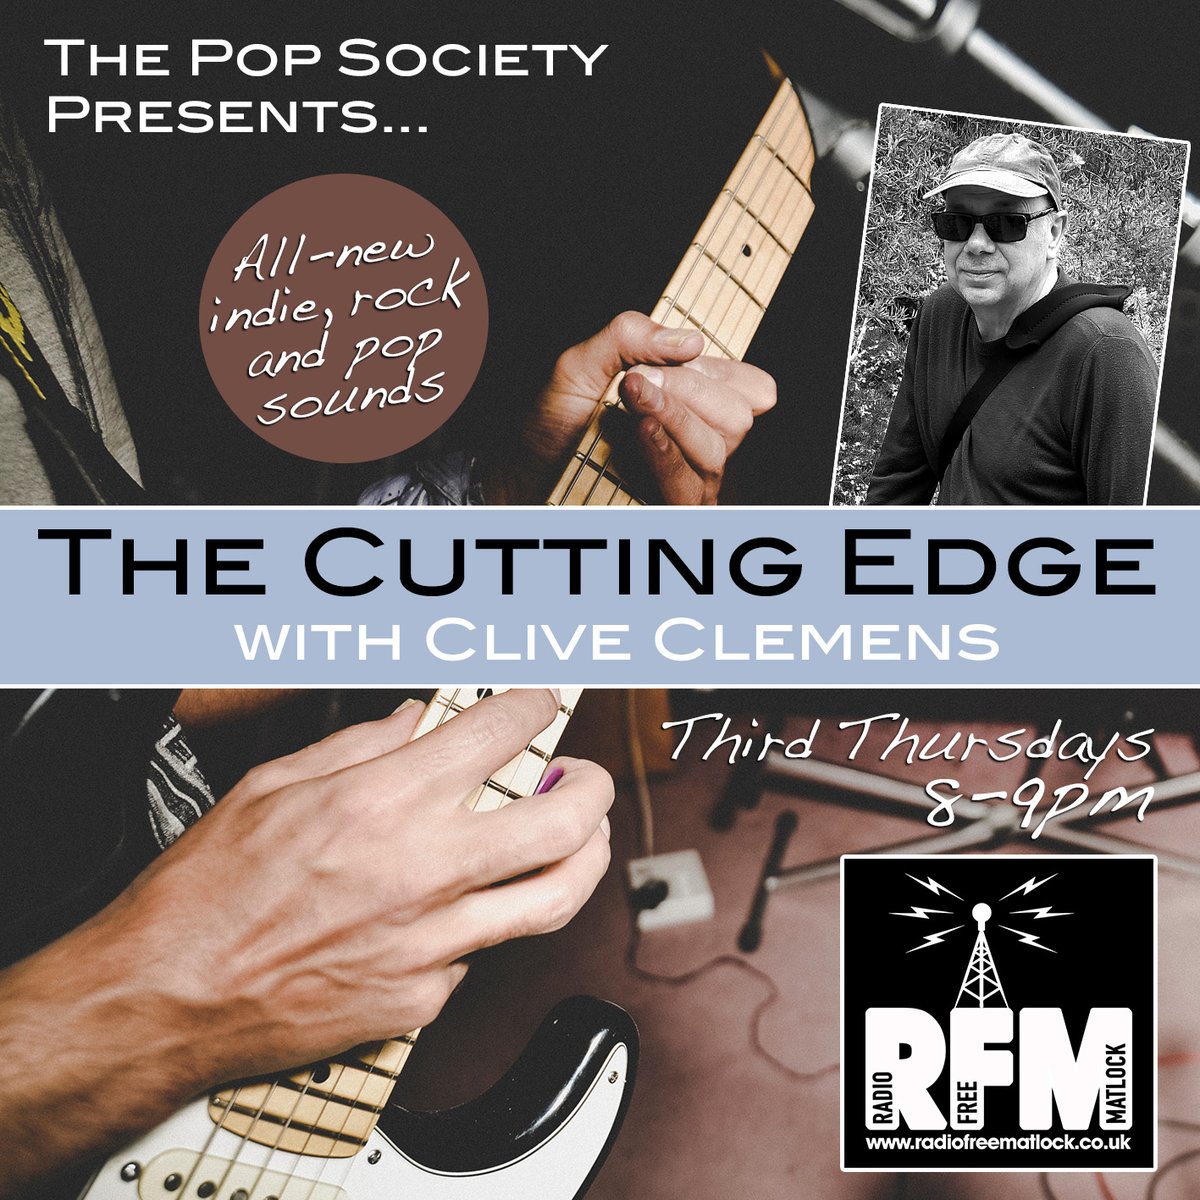 Tonight 8pm on @RadioMatlock my monthly Cutting Edge show, 1 hour of new music including tracks by @limegardenband @safari_room @voldomusic @punchlovemusic @thesecretsister @MrBenAndTheBens @weareswimschool and many more